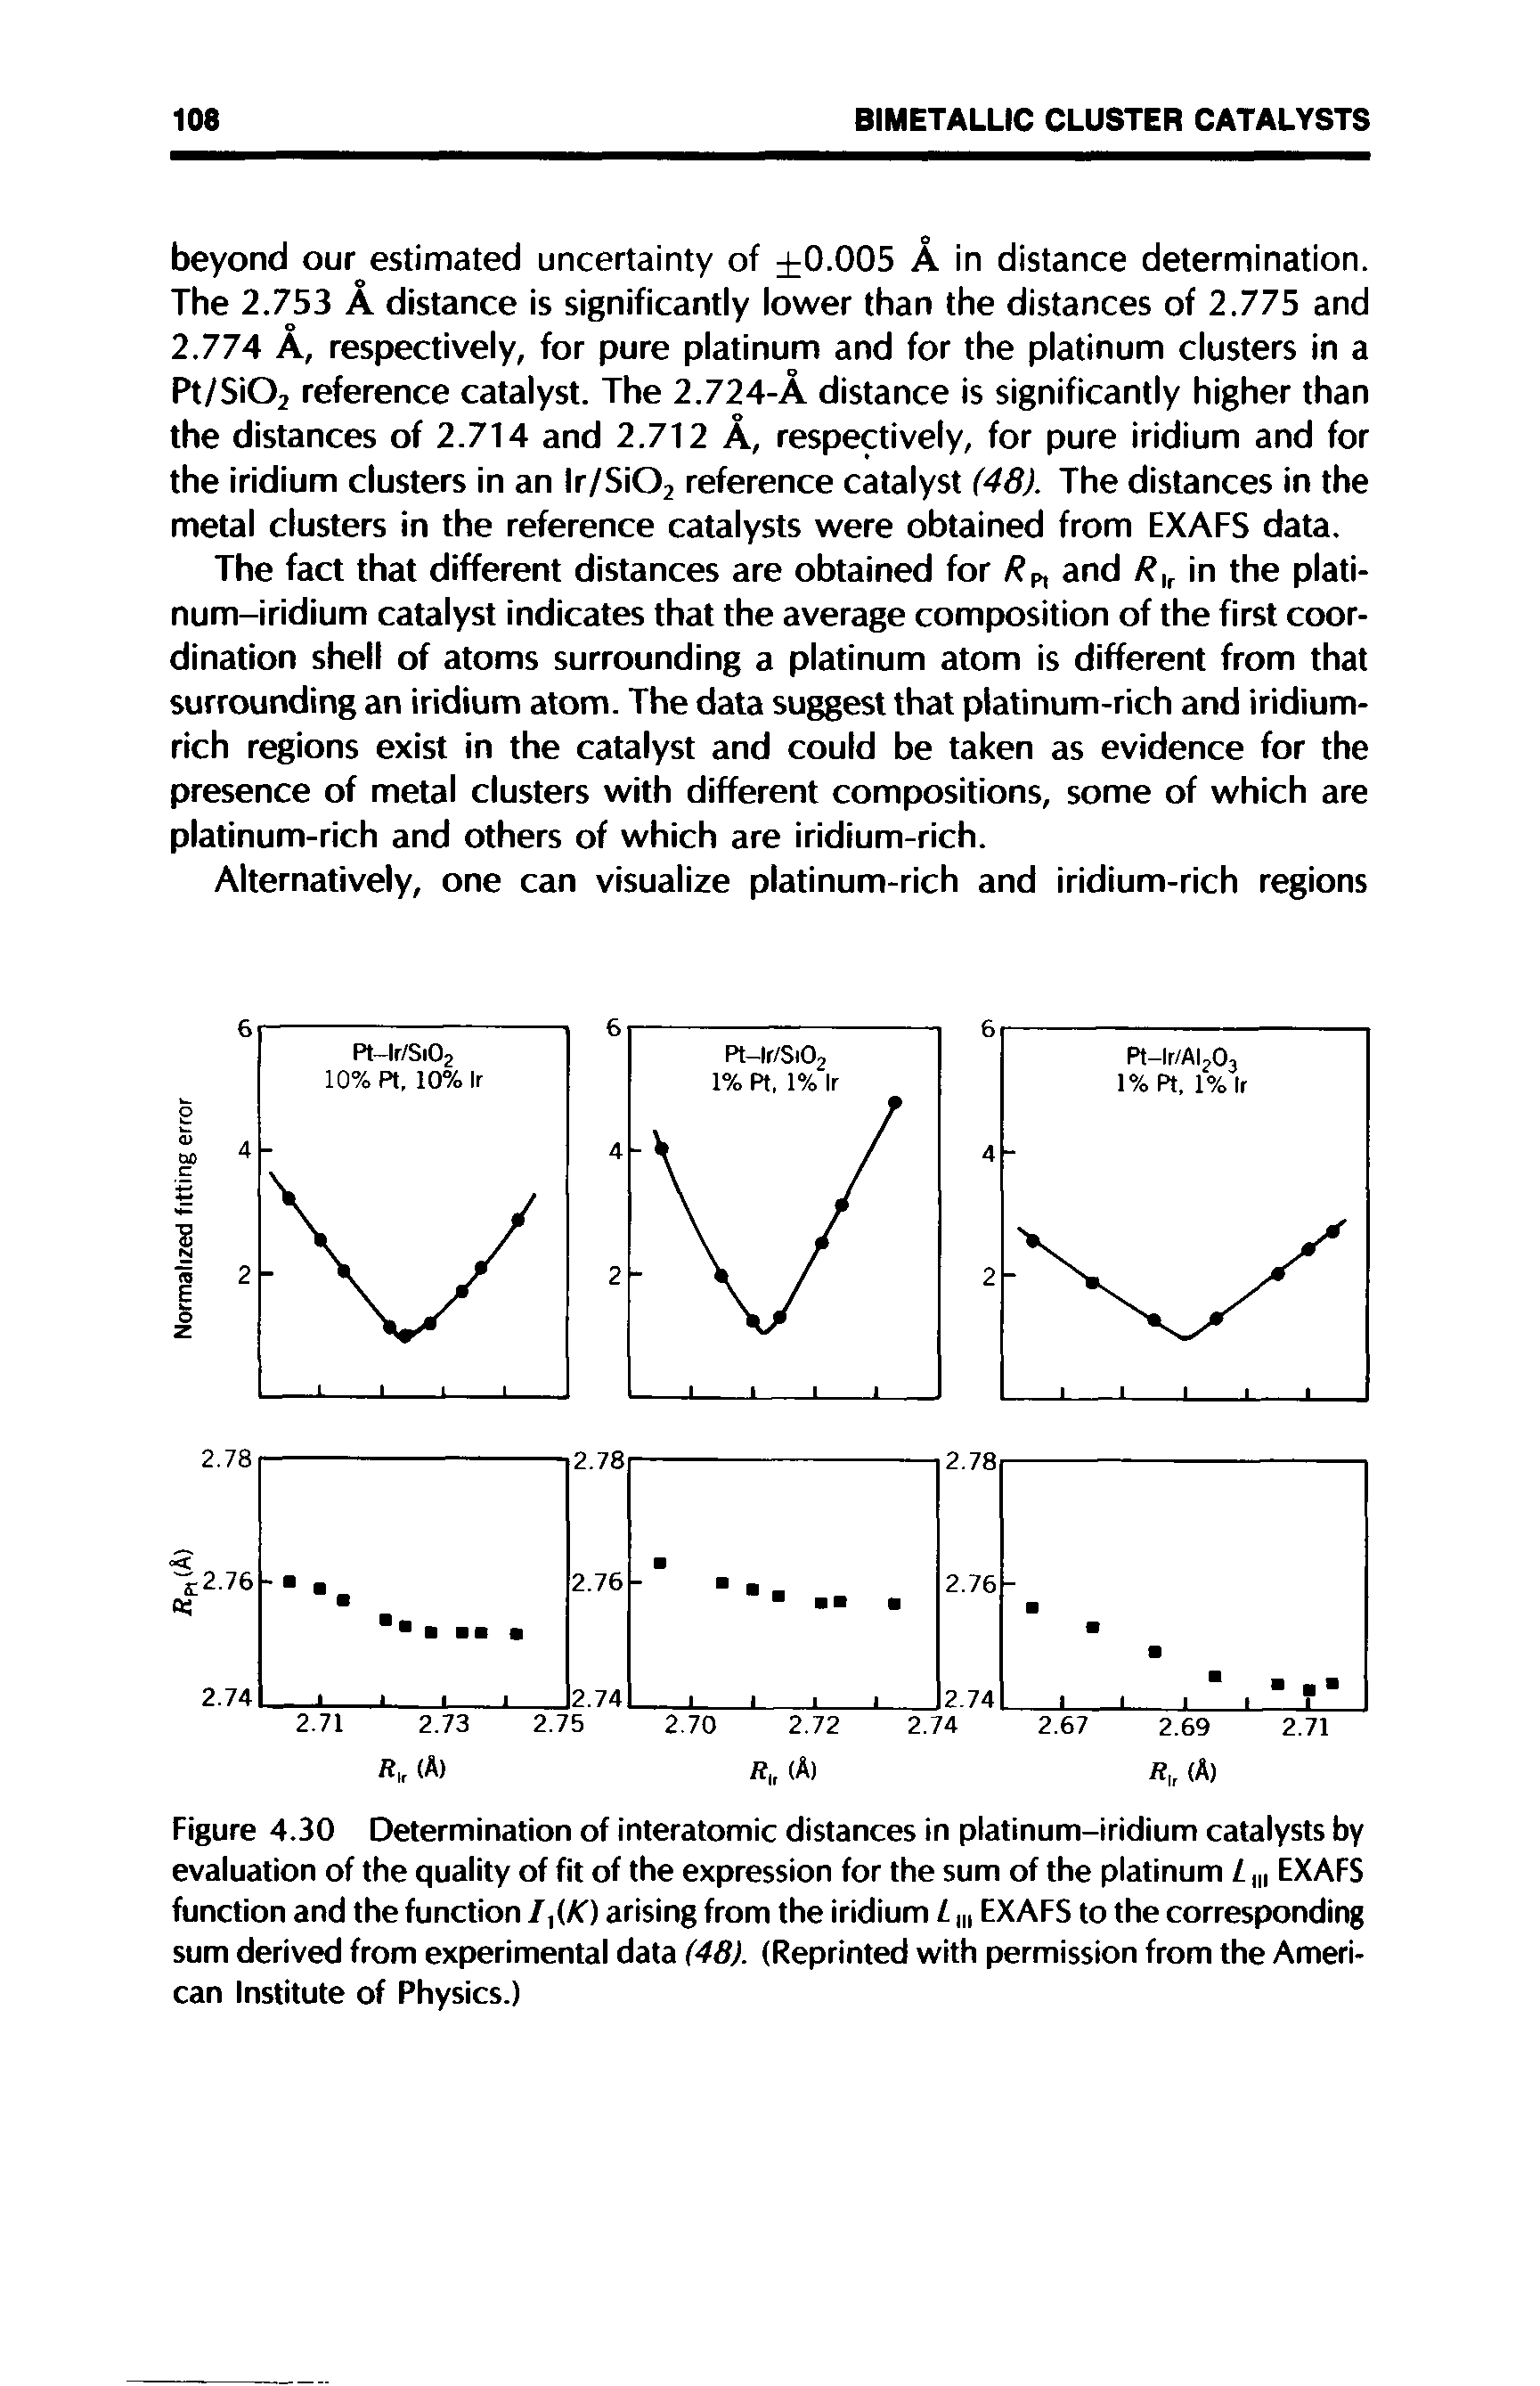 Figure 4.30 Determination of interatomic distances in platinum-iridium catalysts by evaluation of the quality of fit of the expression for the sum of the platinum L EXAFS function and the function I,(K) arising from the iridium L m EXAFS to the corresponding sum derived from experimental data (48). (Reprinted with permission from the American Institute of Physics.)...